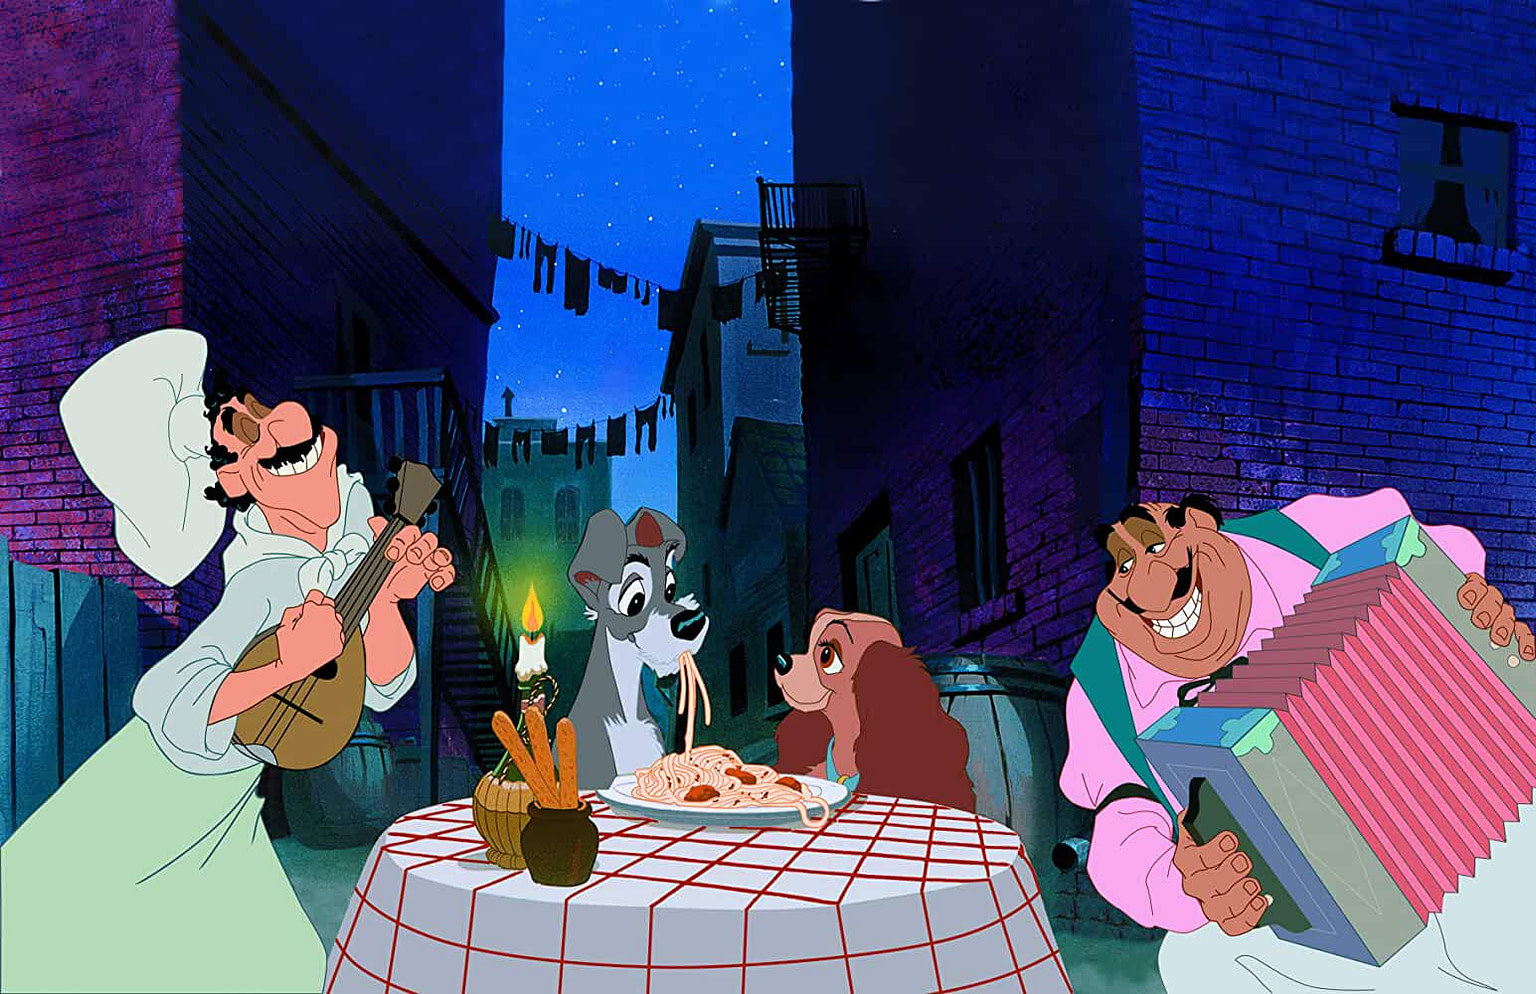 Disney Films: Lady and the tramp